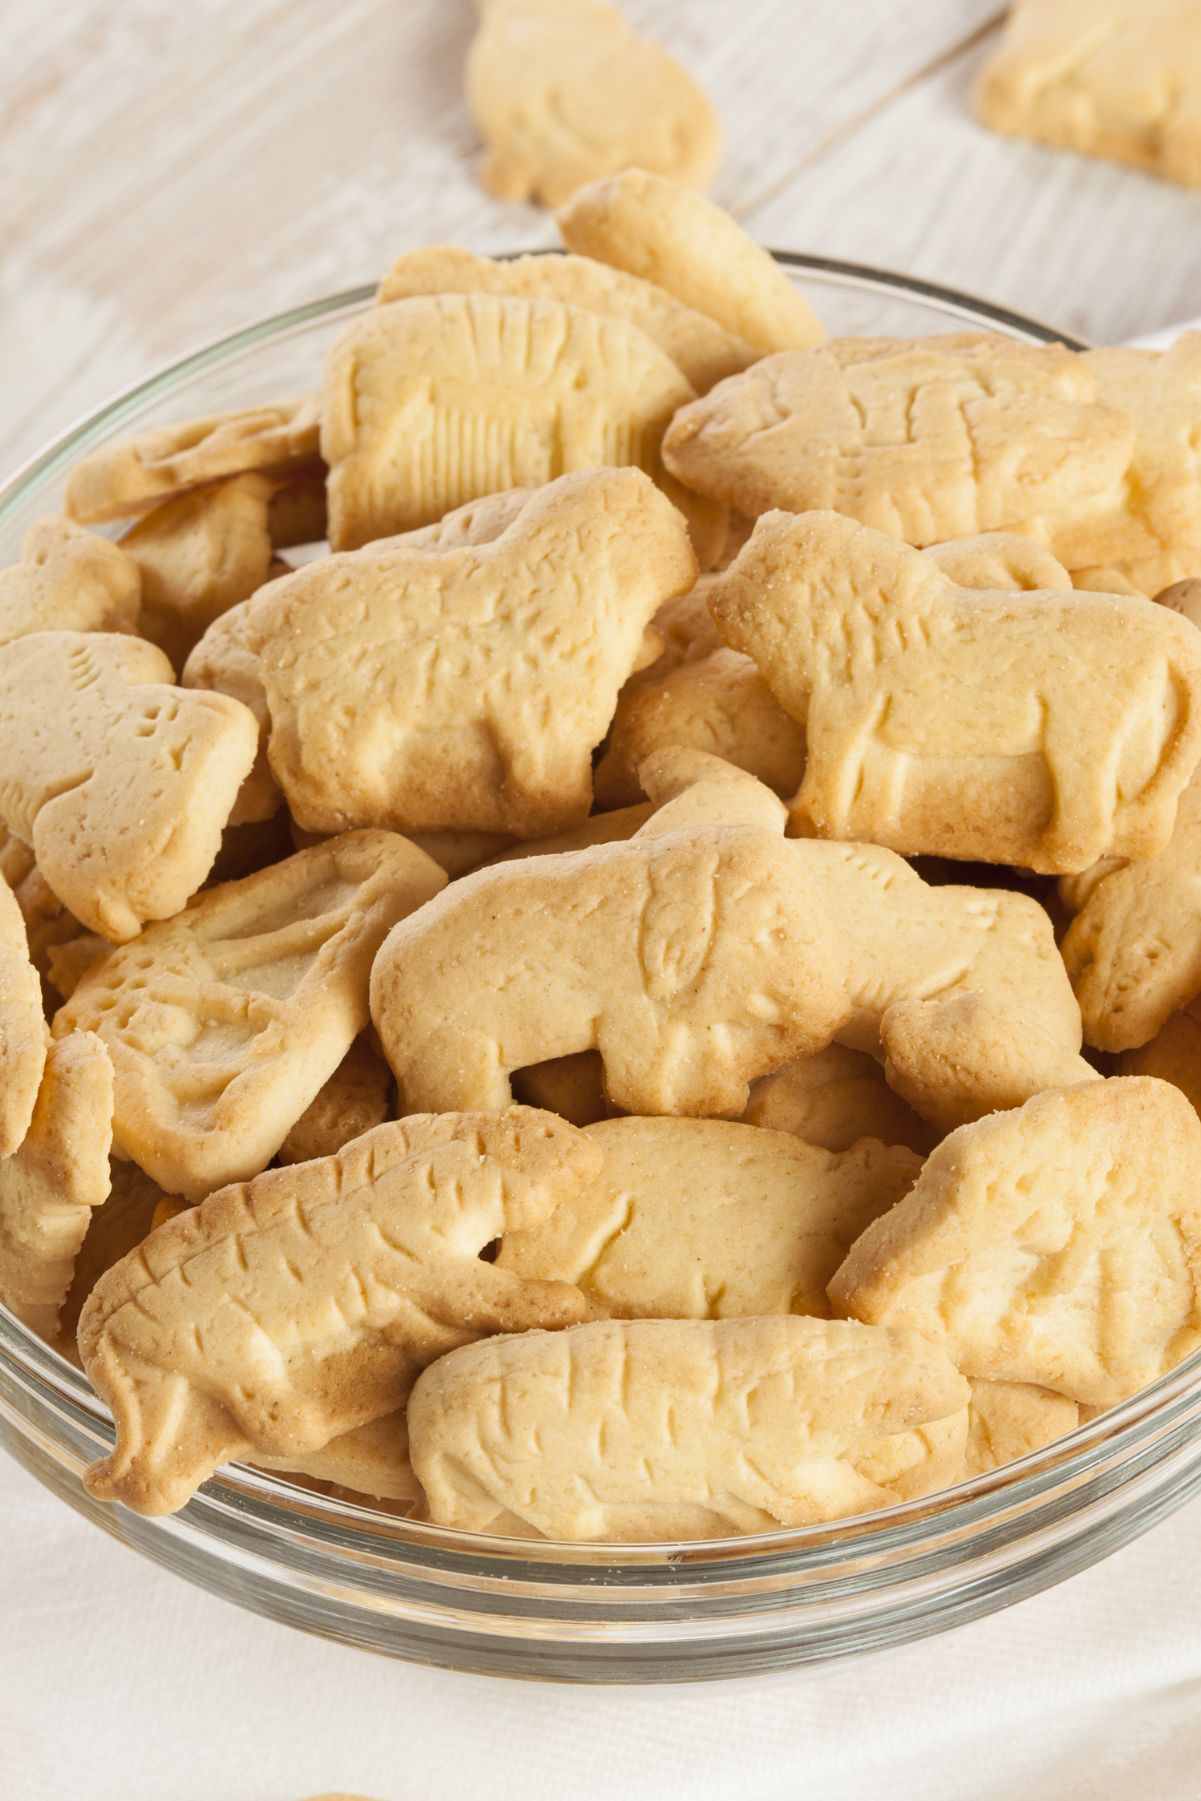 Closeup of a pile of animal crackers.